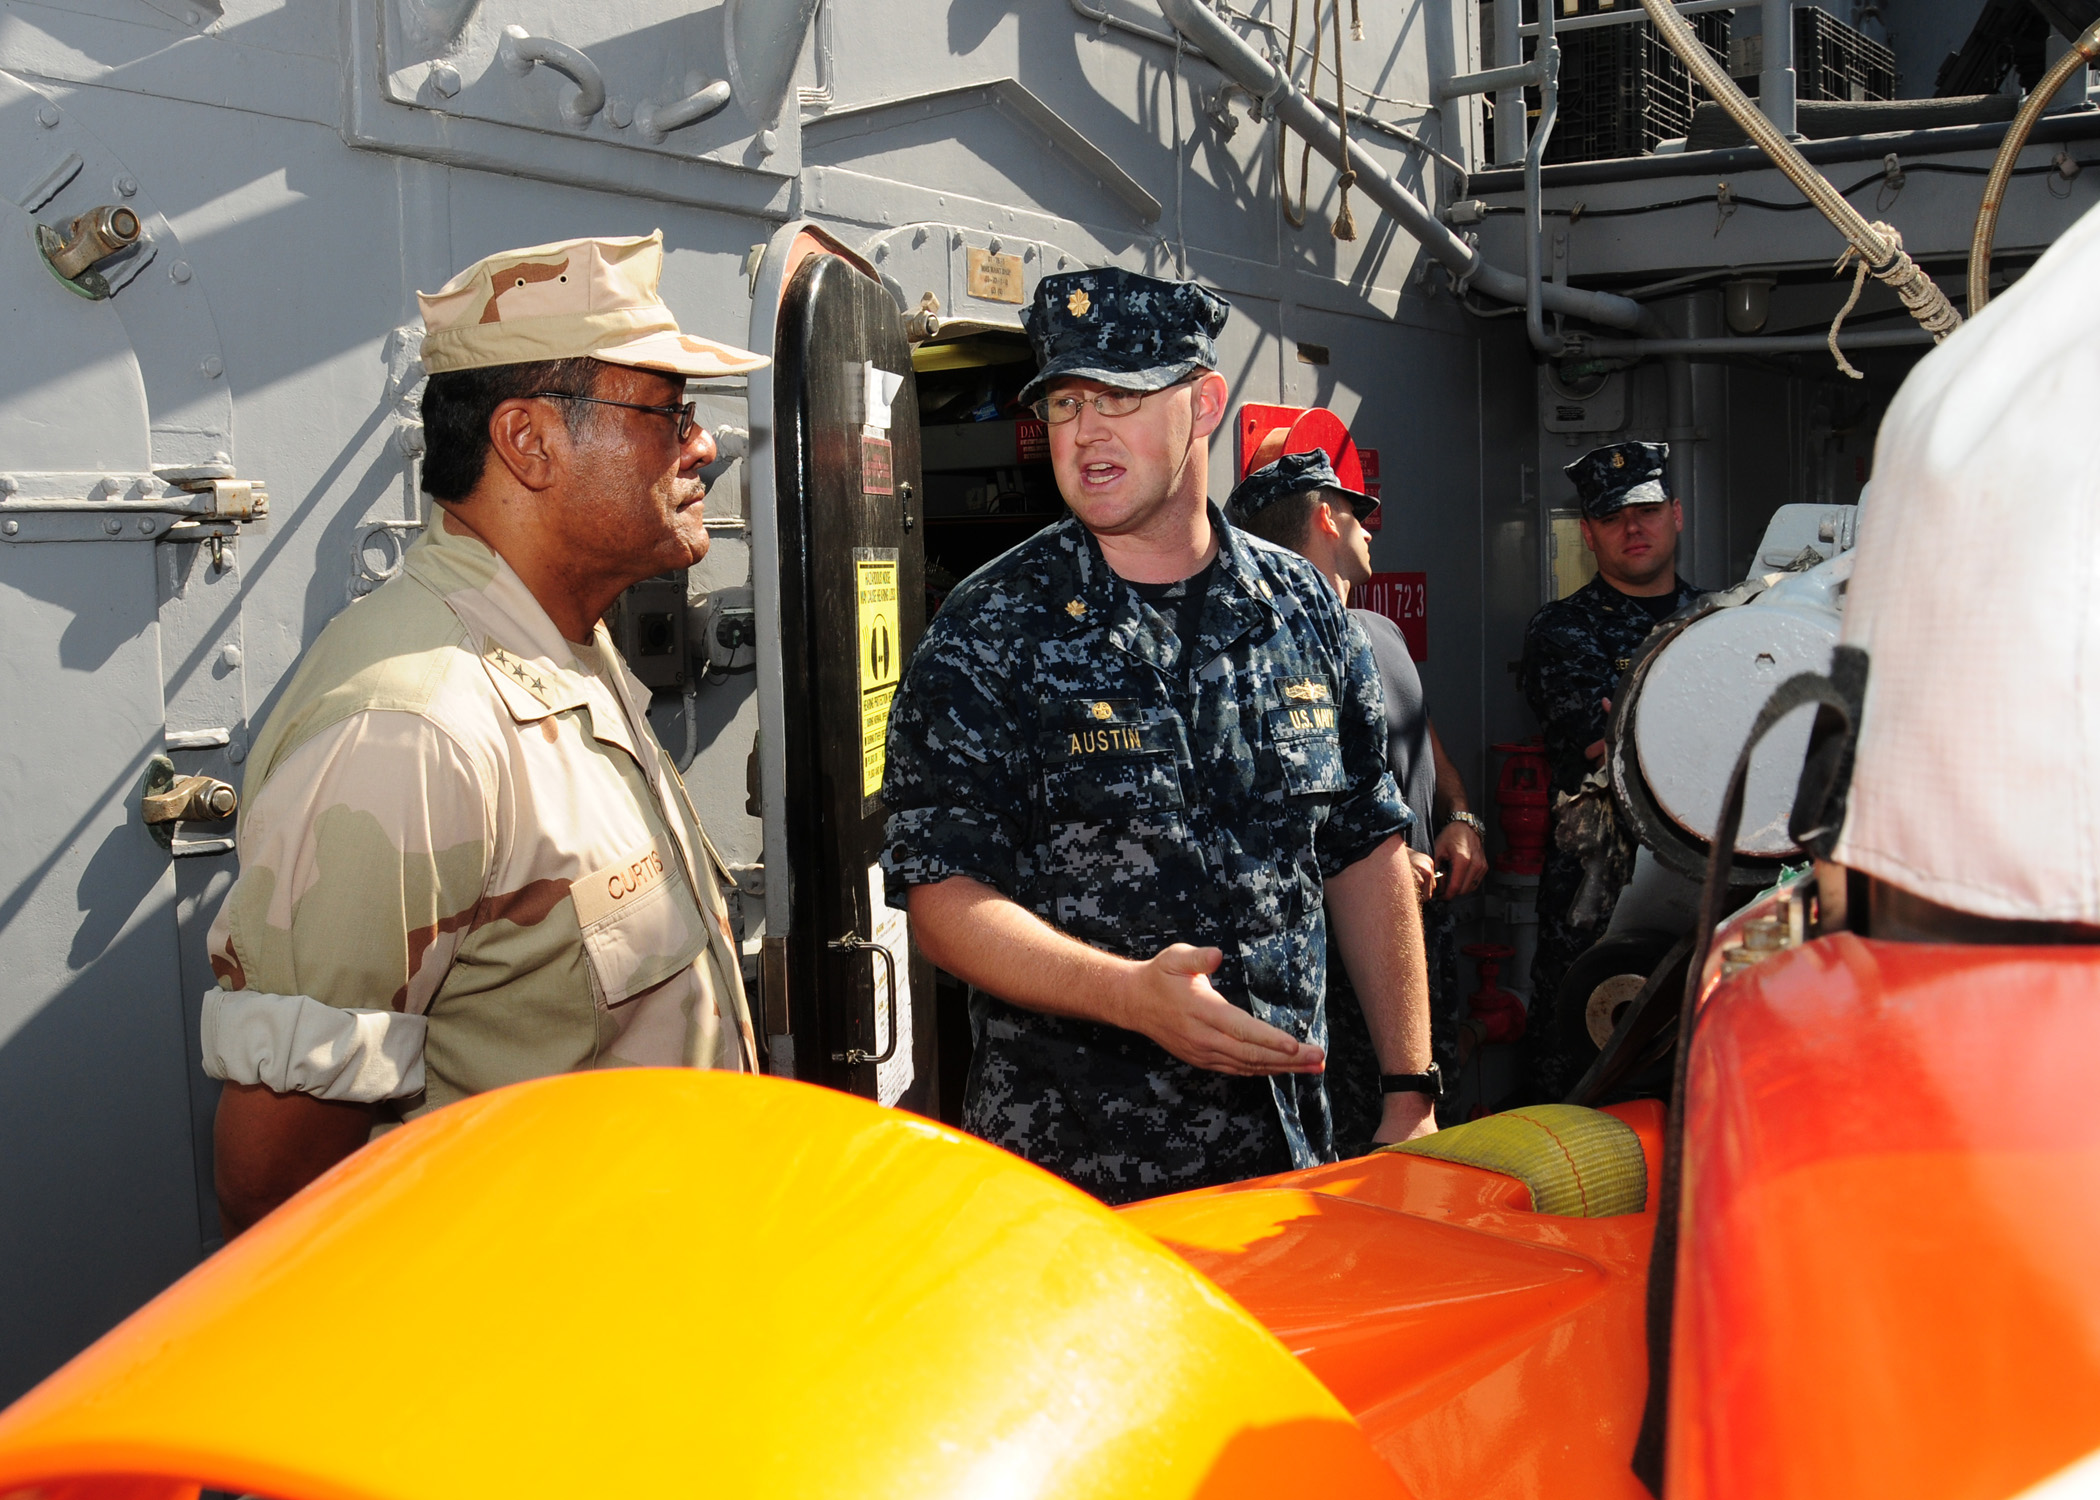 US Navy 101029-N-2903B-003 Lt. Cmdr. Spencer Austin explains the capabilities of an SLQ-48 Mine Neutralization Vehicle to Vice Adm. D.C. Curtis